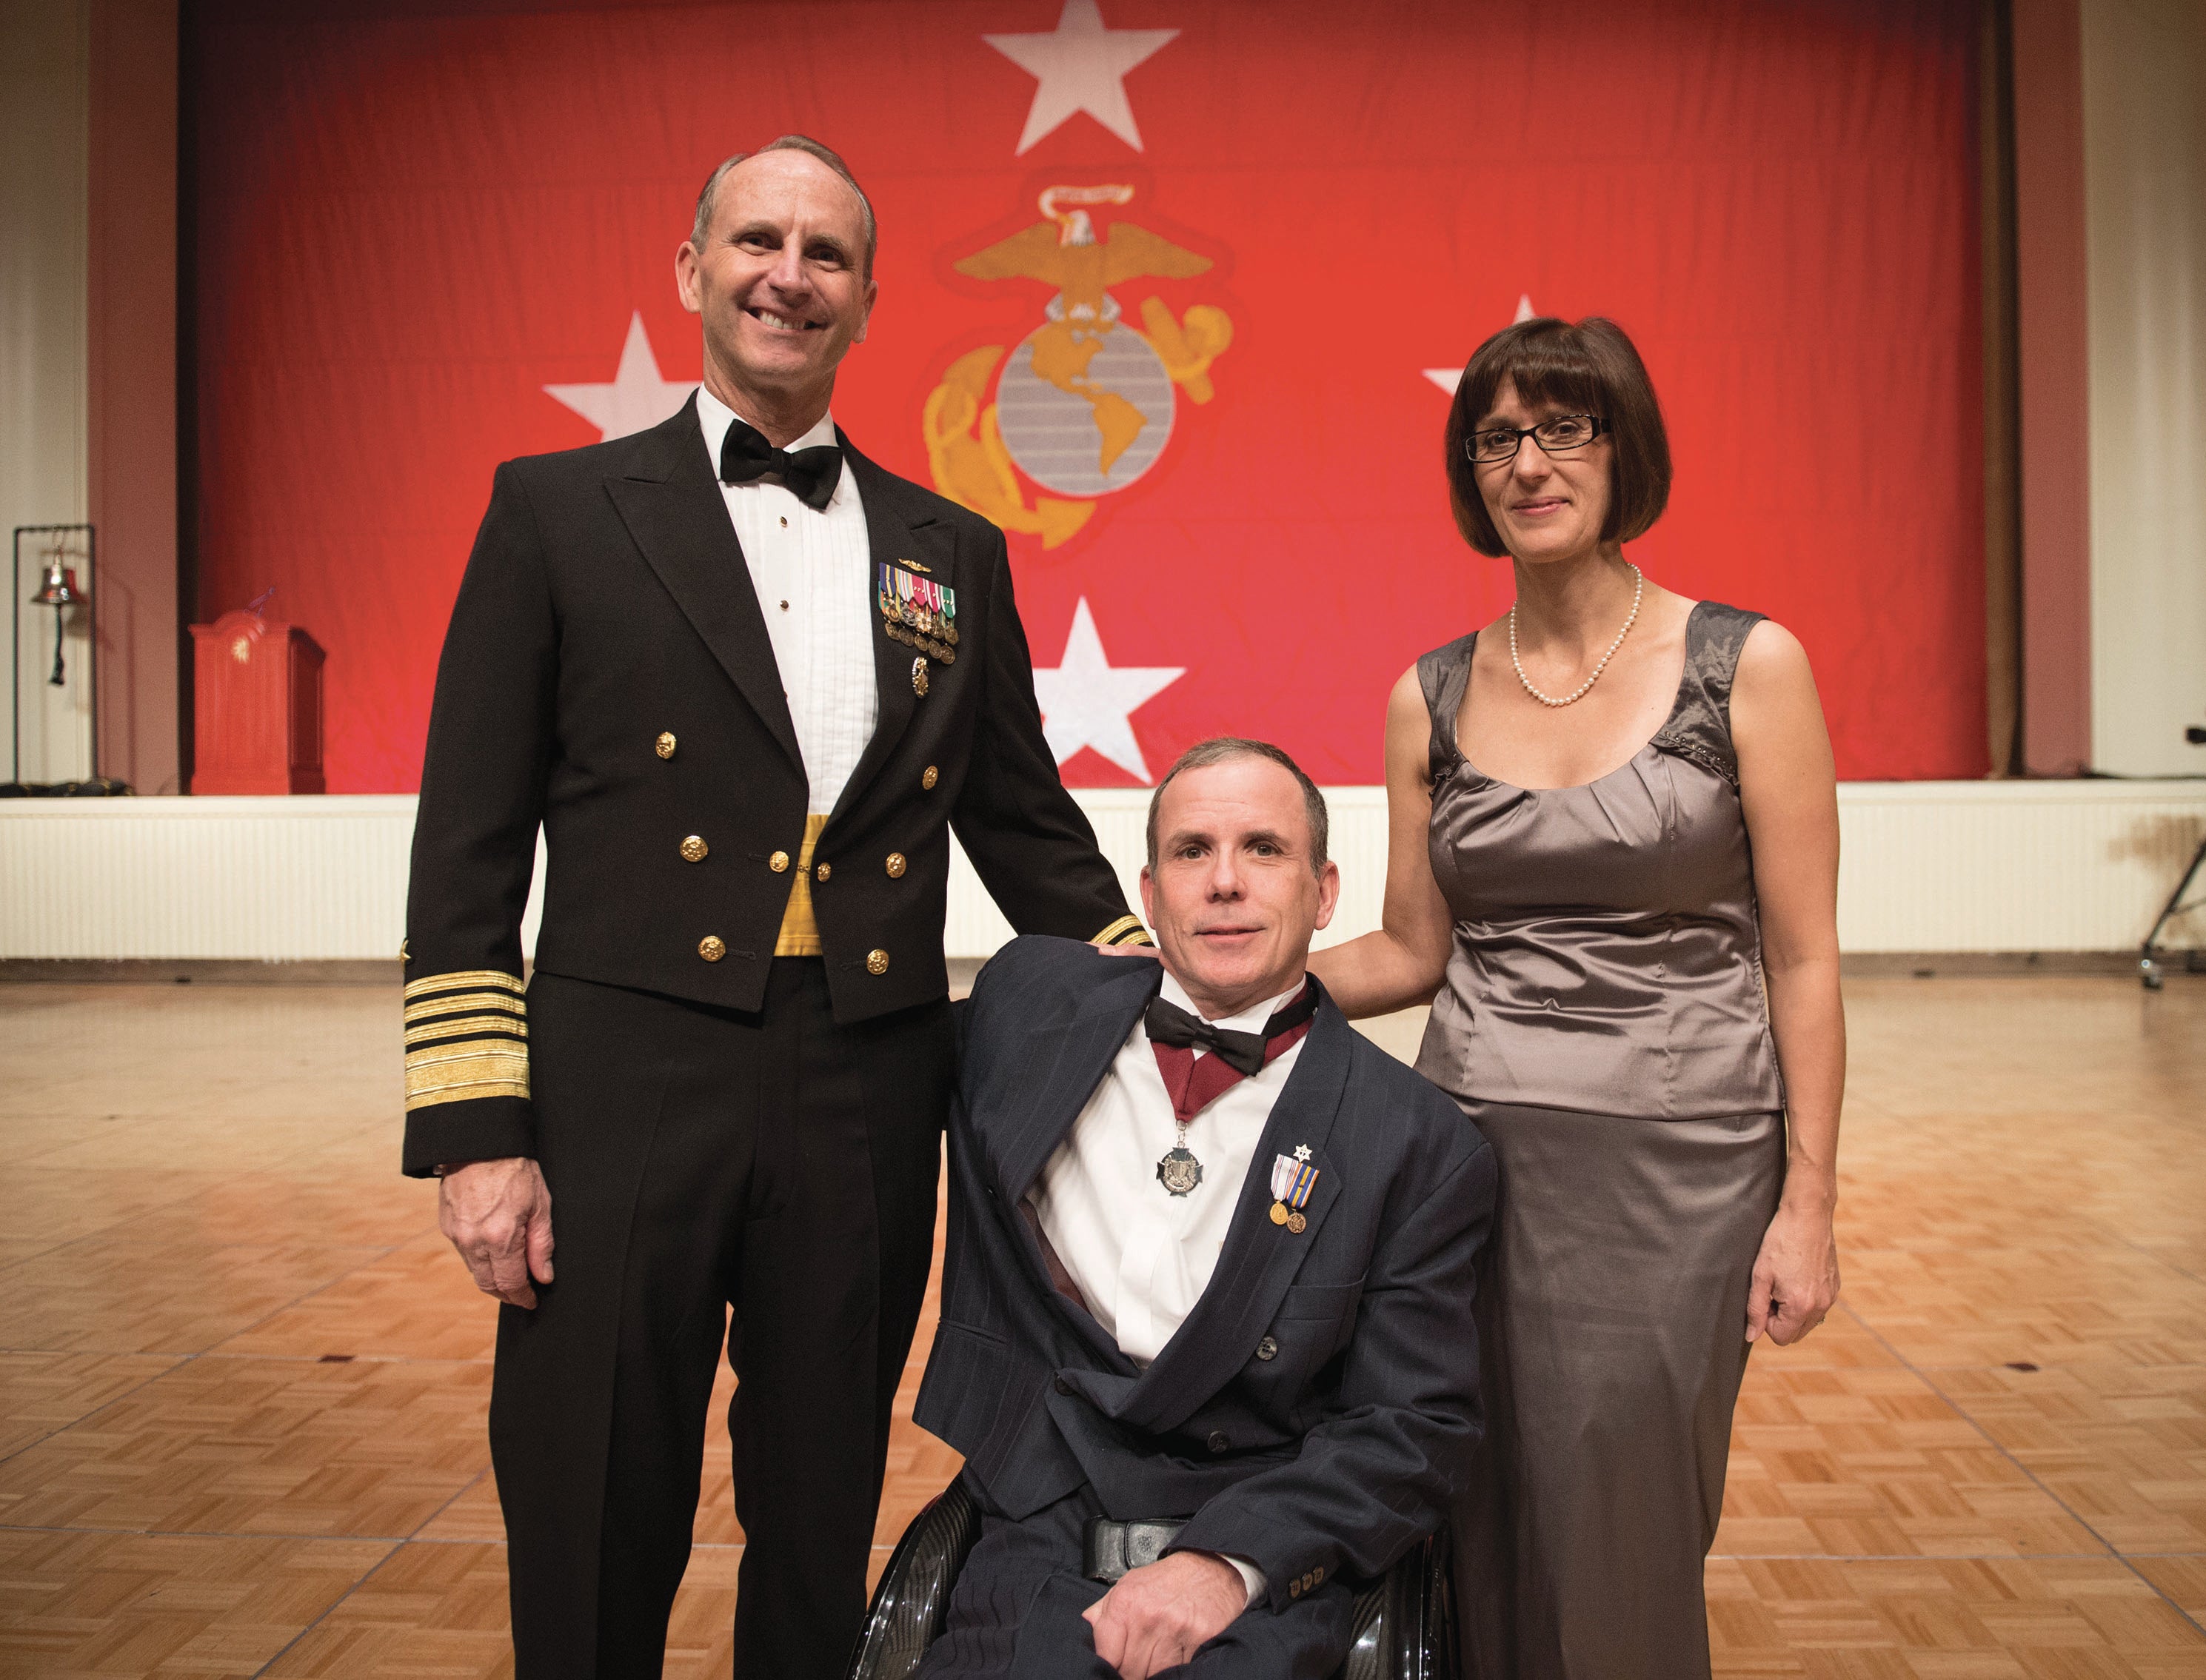 Admiral Jon Greenert, chief of naval operations for the U.S. Navy, with Rory and Rosemarie Cooper at the United States Marine Corps Birthday Ball